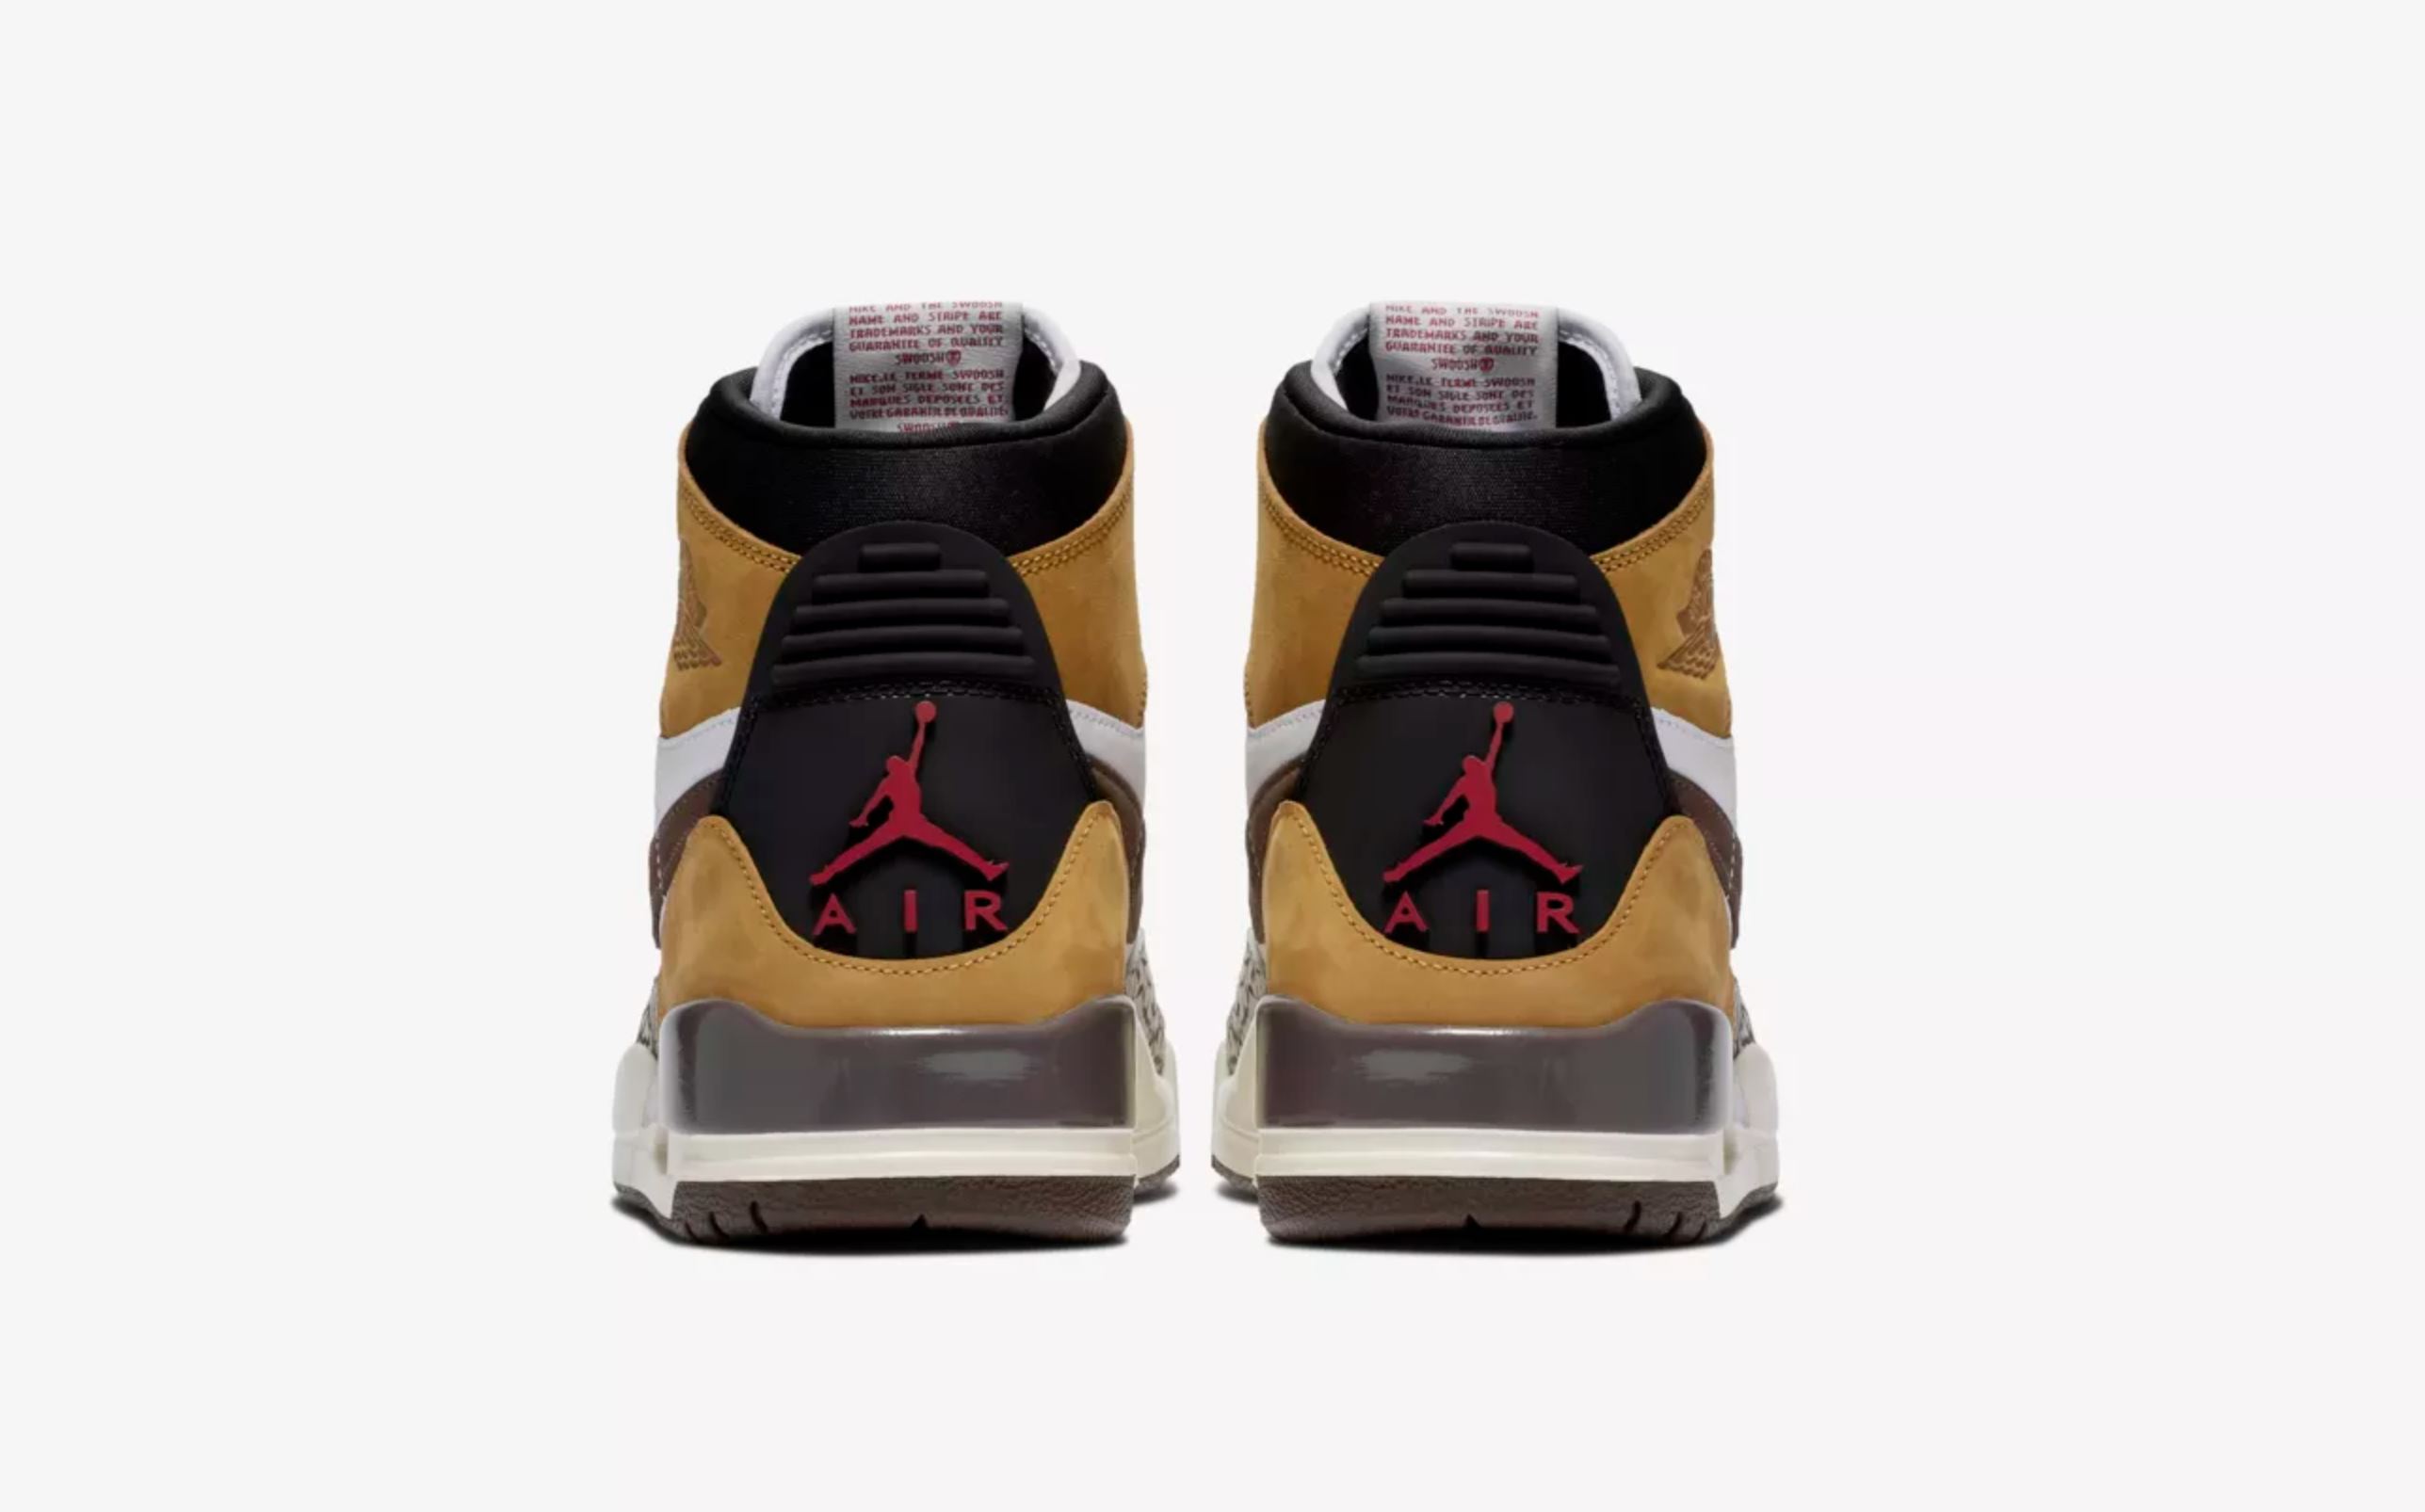 The Air Jordan Legacy 312 'Wheat/Varsity Red' Gives Off ROTY Vibes